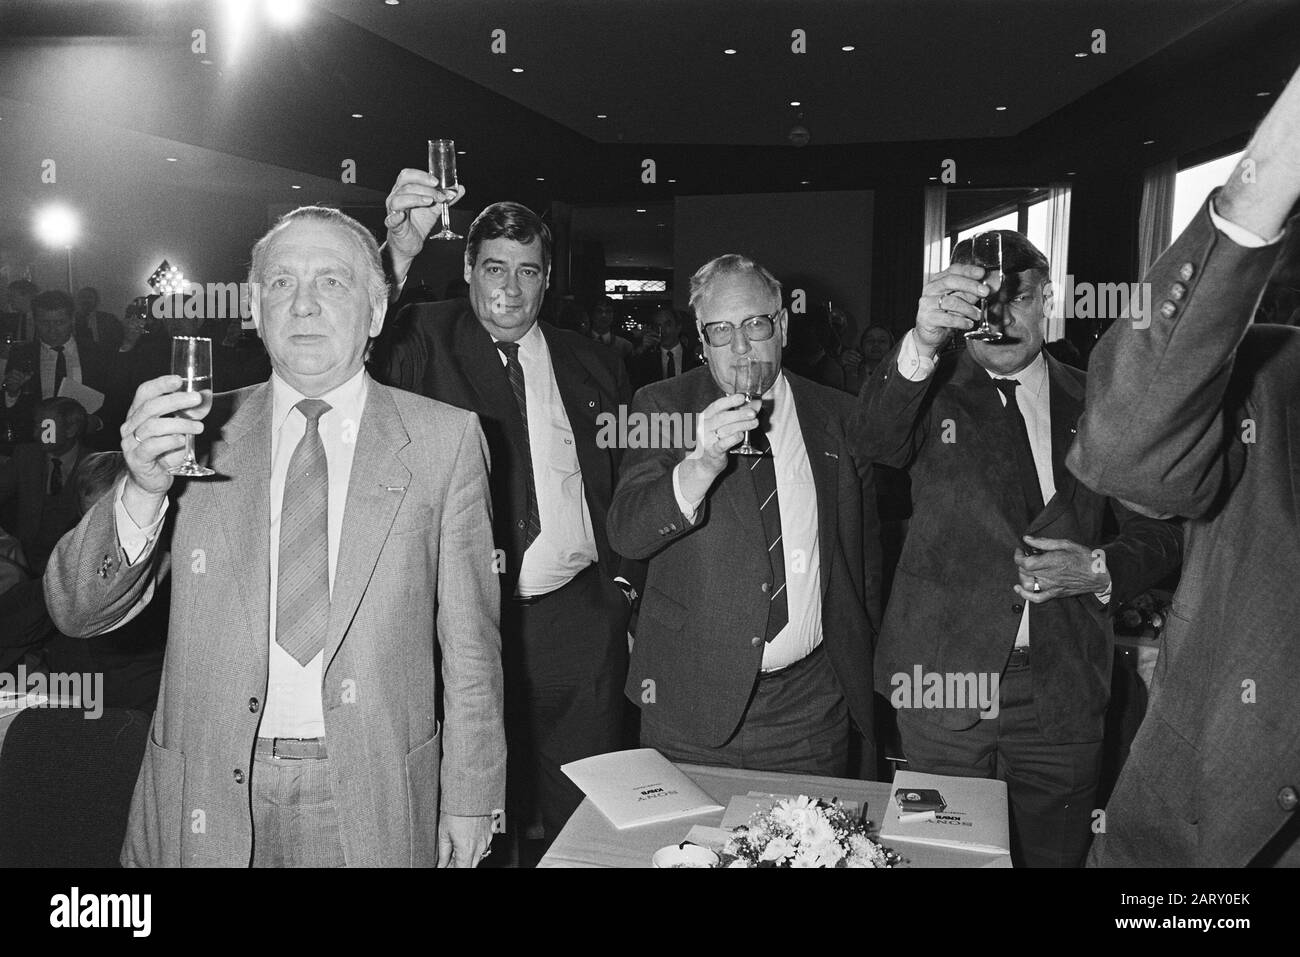 Sponsorcontract Sony-KNVB signed  Chairman of the KNVB Van Marle (l) and Mr. A. (Ton) Brandsteder of Sony (r) raise the glass Date: November 14, 1983 Keywords: companies, agreements, sponsorship, football, chairmen Personal name: Brandsteder, A., Marle, J.W. of Institution Name: Sony Stock Photo